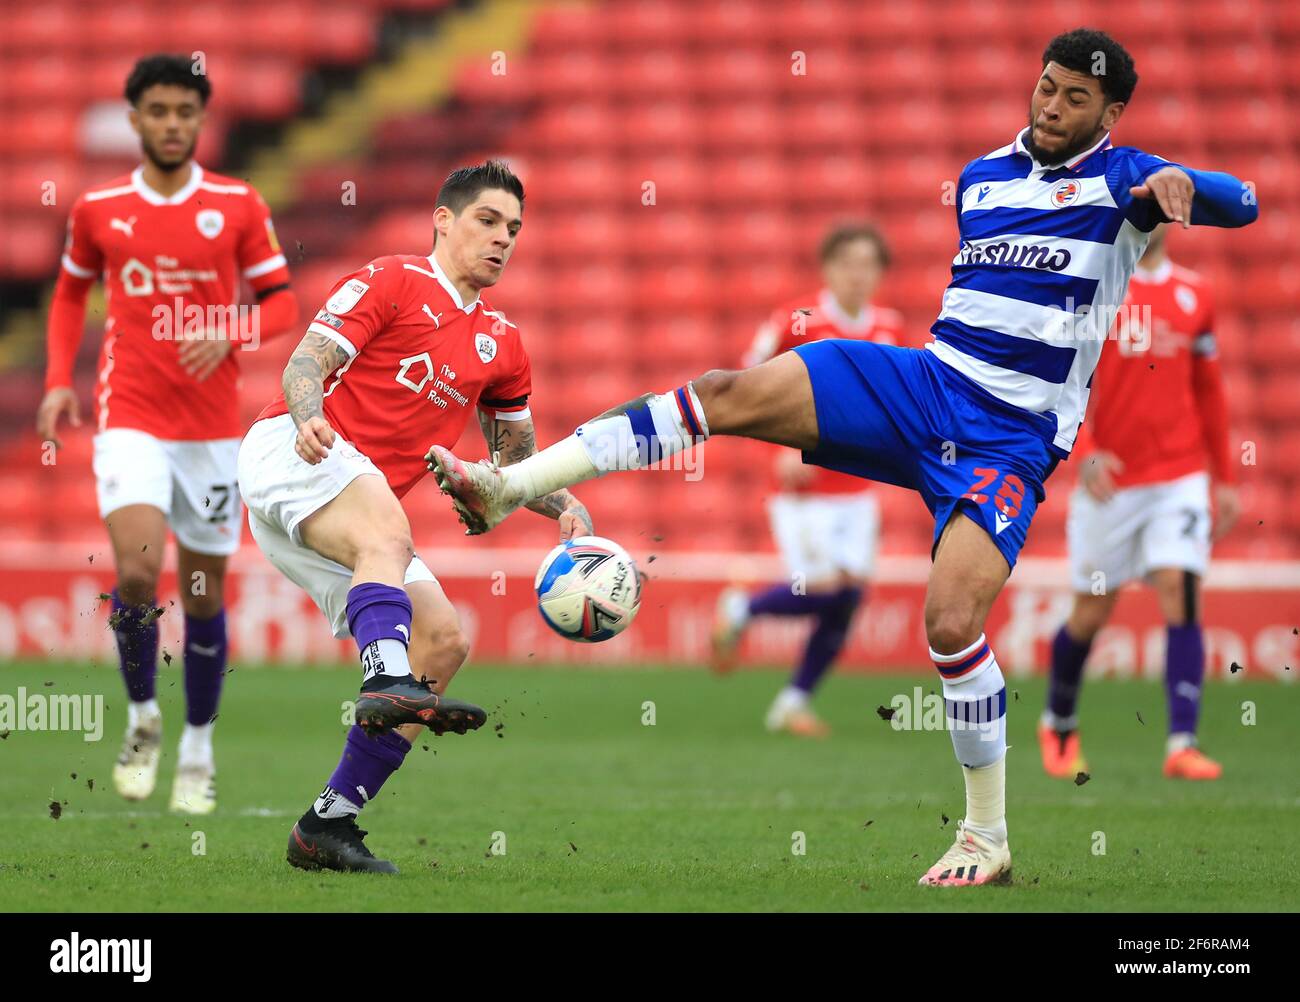 Reading's Josh Laurent (right) and Barnsley's Isaac Christie-Davies battle for the ball during the Sky Bet Championship match at Oakwell Stadium, Barnsley. Picture date: Friday April 2, 2021. See PA story: SOCCER Barnsley. Photo credit should read: Mike Egerton/PA Wire. RESTRICTIONS: EDITORIAL USE ONLY No use with unauthorised audio, video, data, fixture lists, club/league logos or 'live' services. Online in-match use limited to 120 images, no video emulation. No use in betting, games or single club/league/player publications. Stock Photo